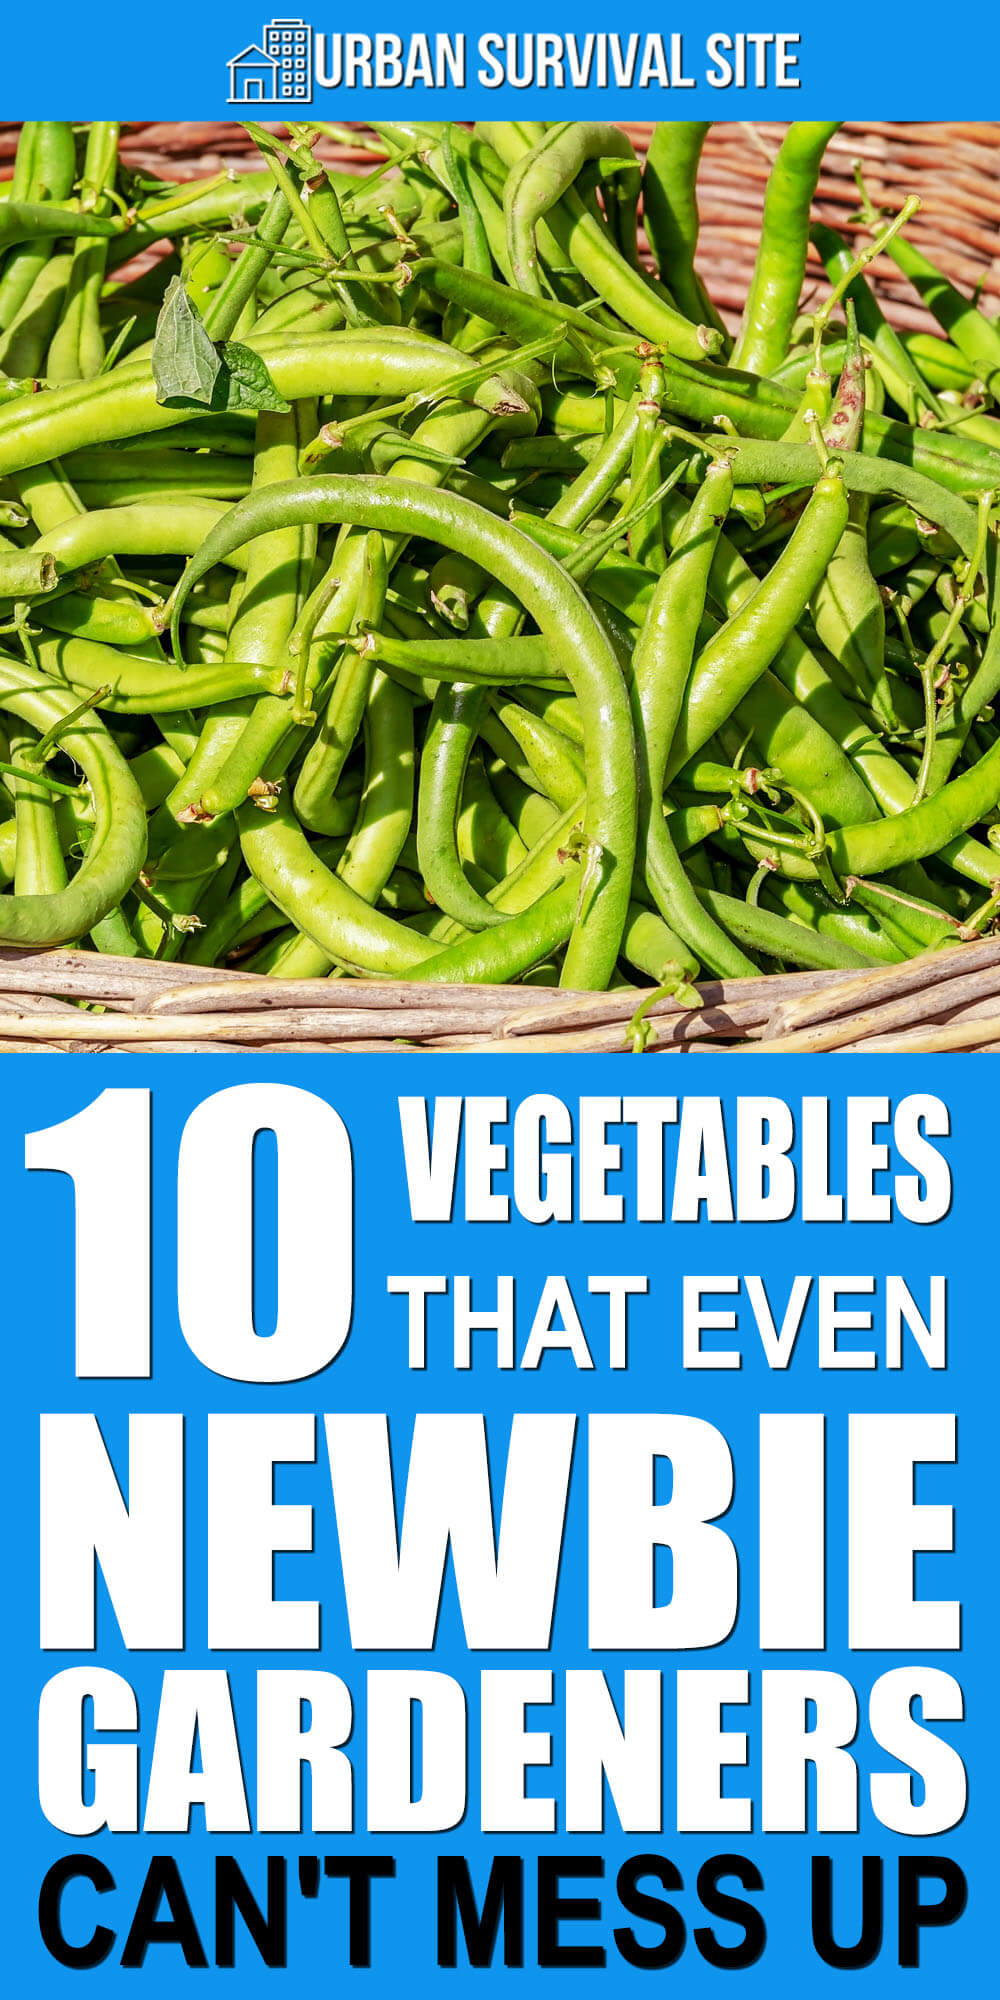 10 Vegetables That Even New Gardeners Can't Mess Up